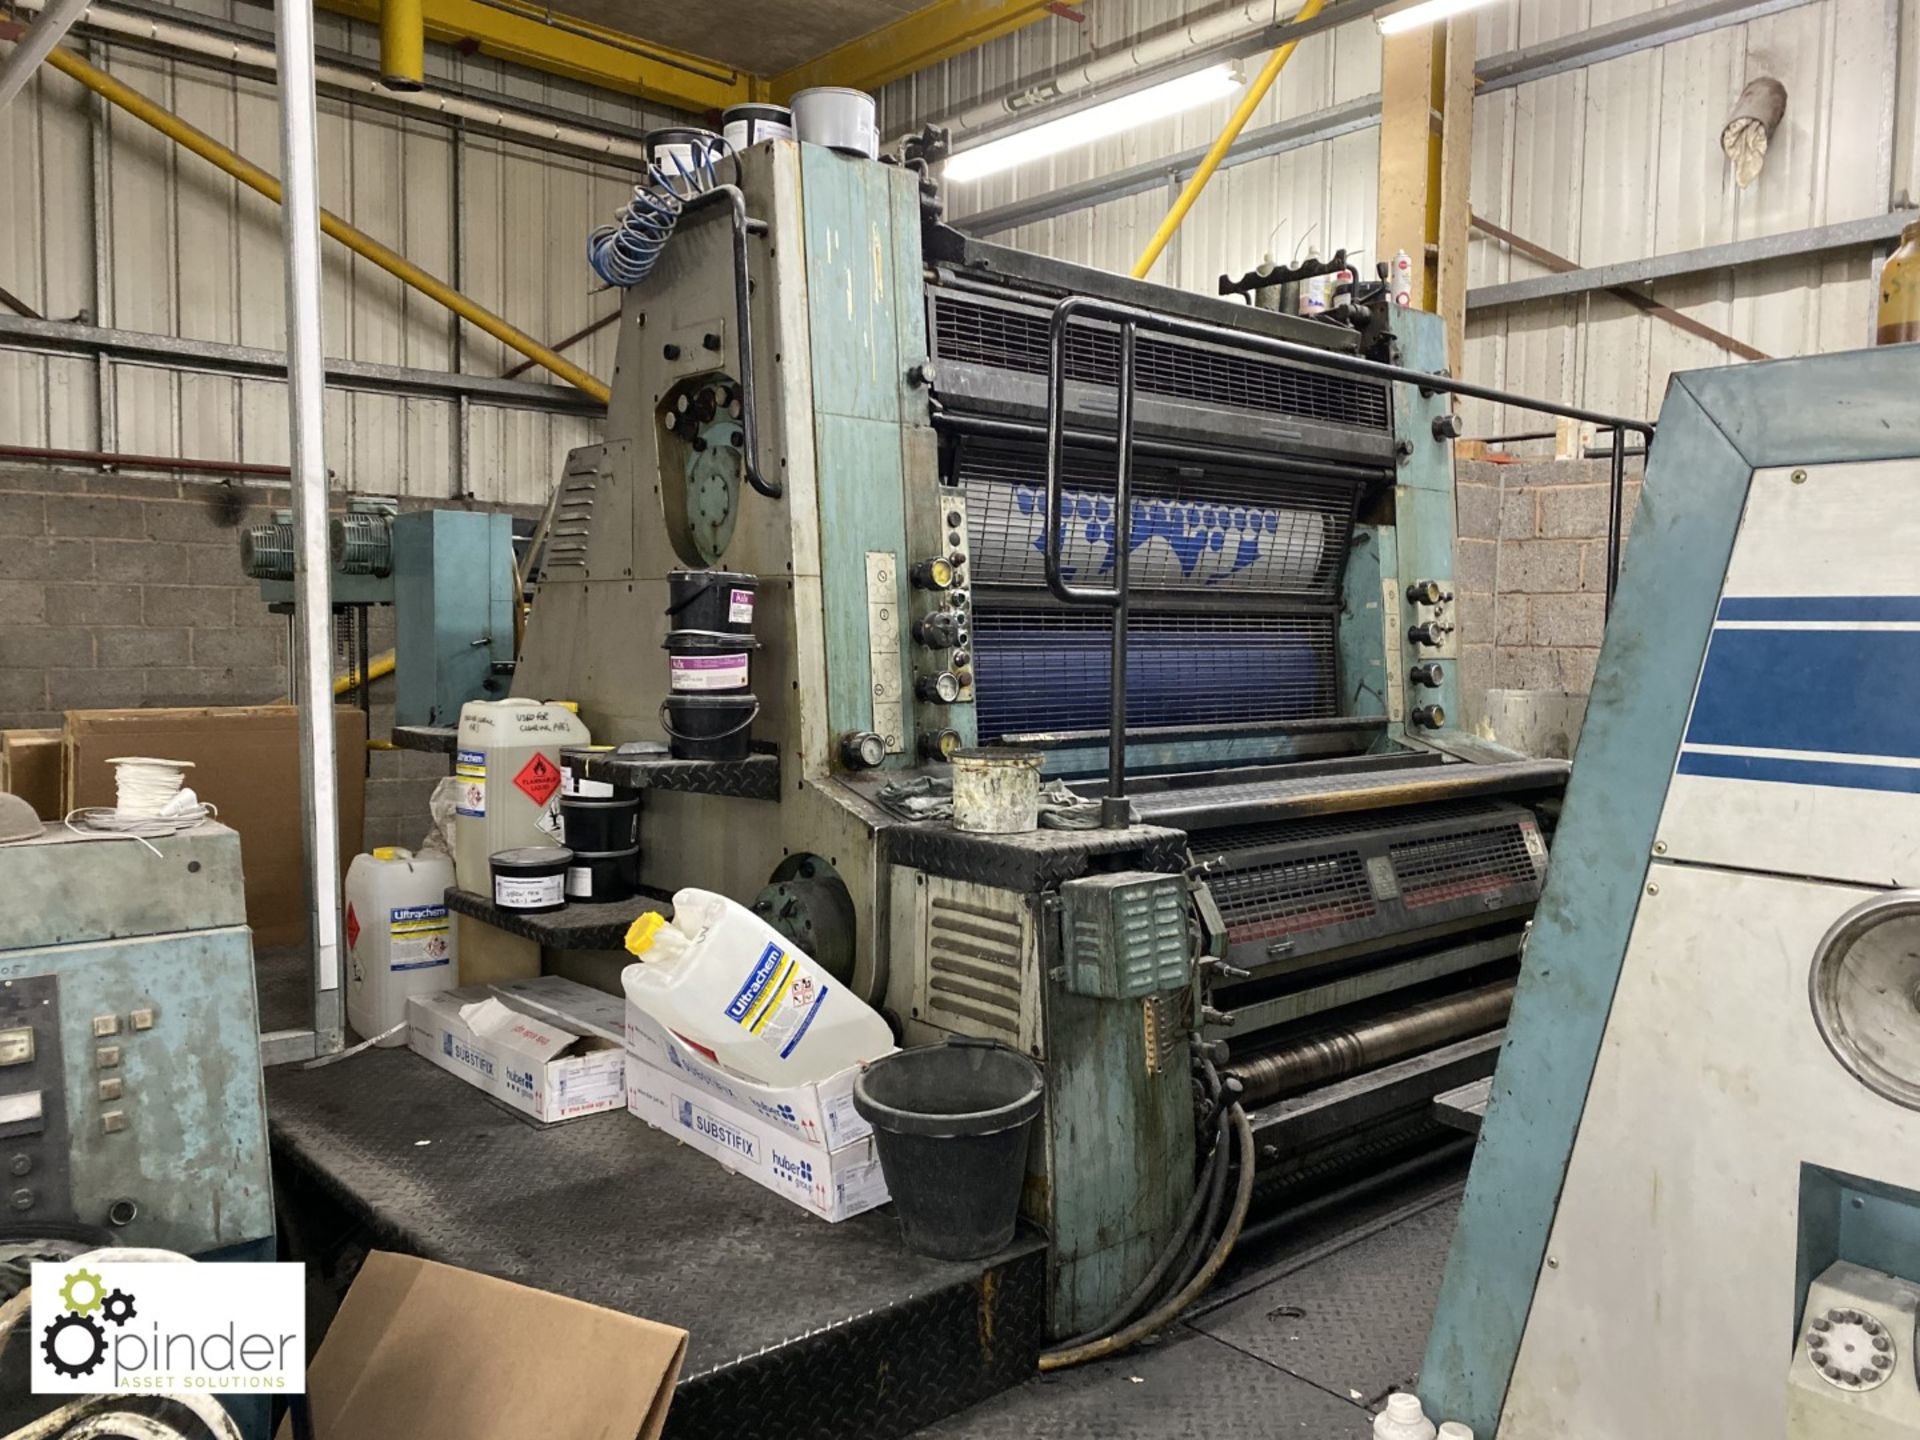 Man Roland 802 7 Series 826 2-colour Press, year 1981, serial number 11217B, max sheet size 1115mm x - Image 8 of 18